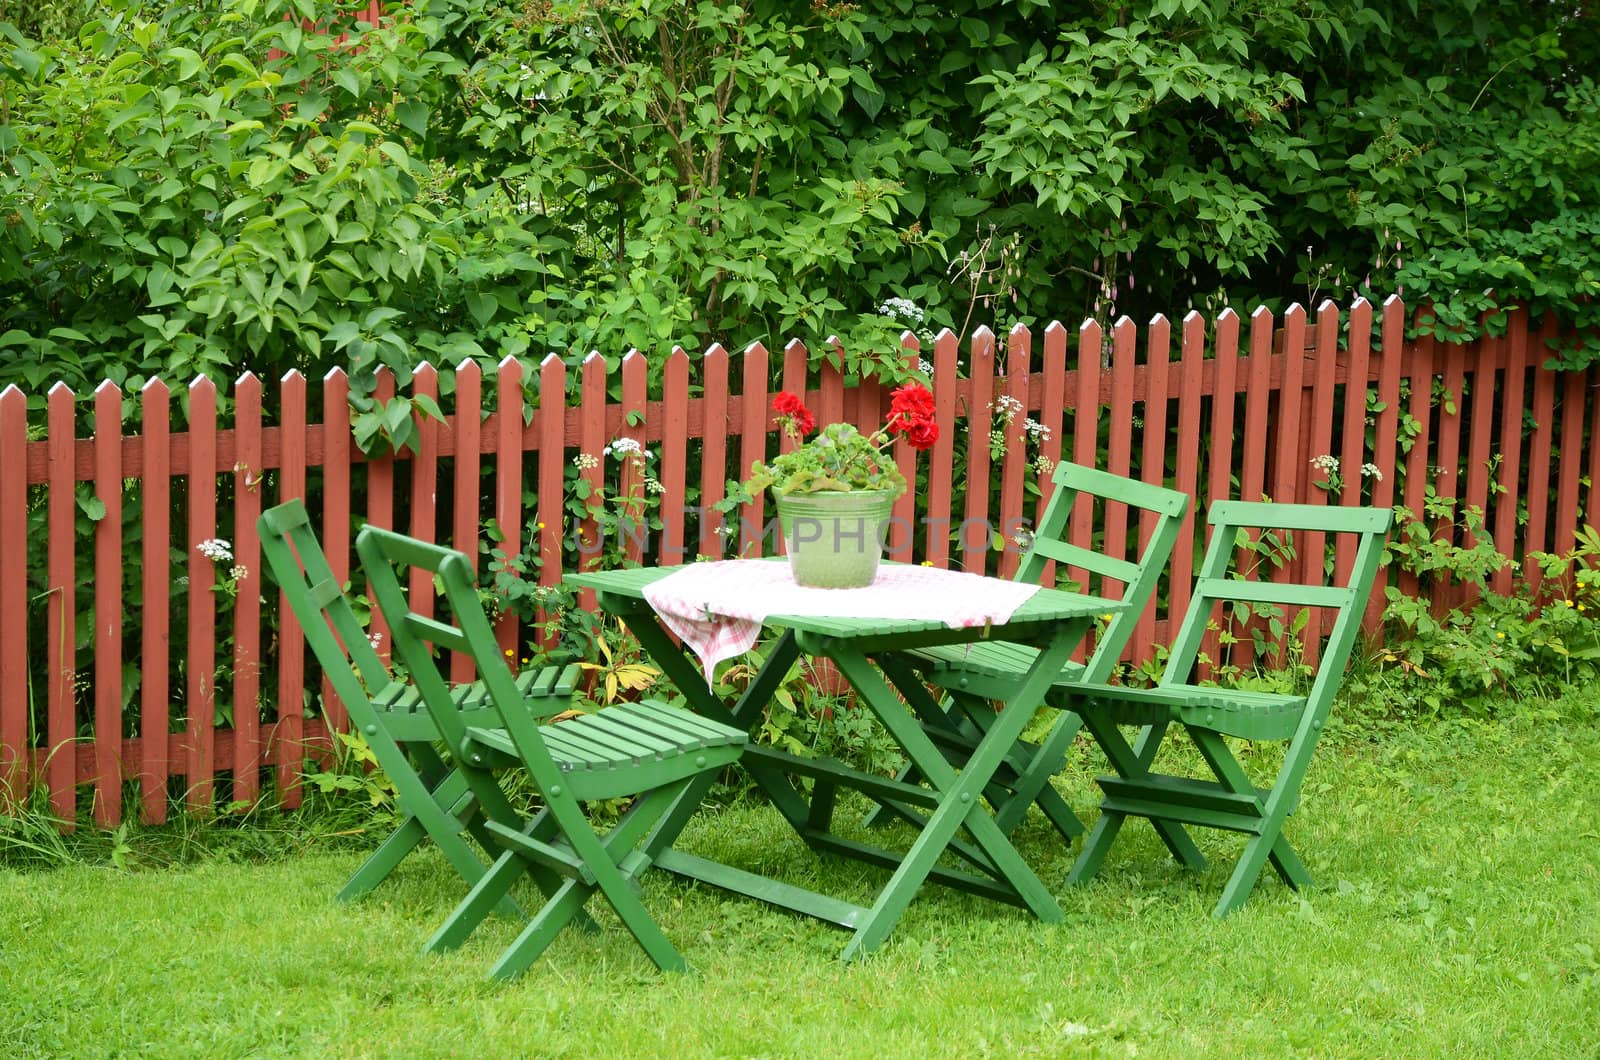 Green garden furniture in olden style made of wood